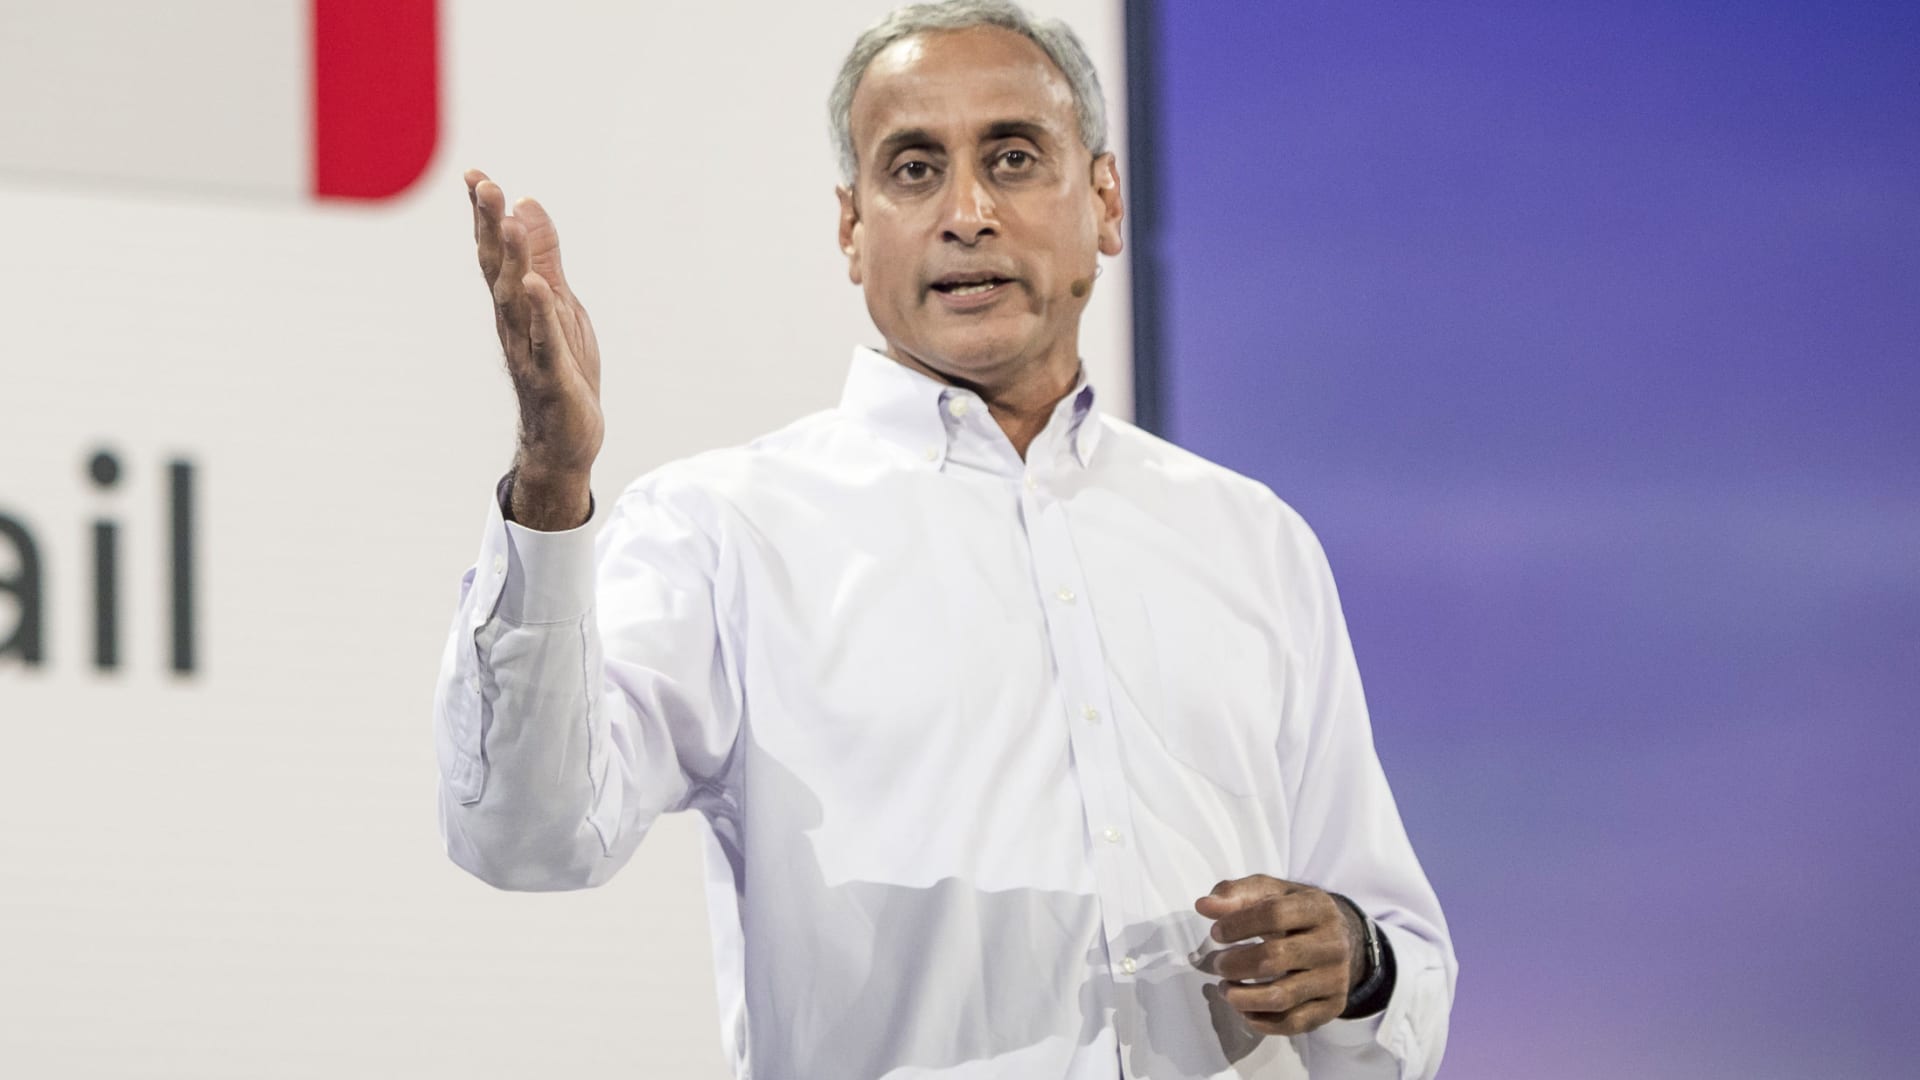 Google search boss warns employees of 'new operating reality,' urges them to move faster